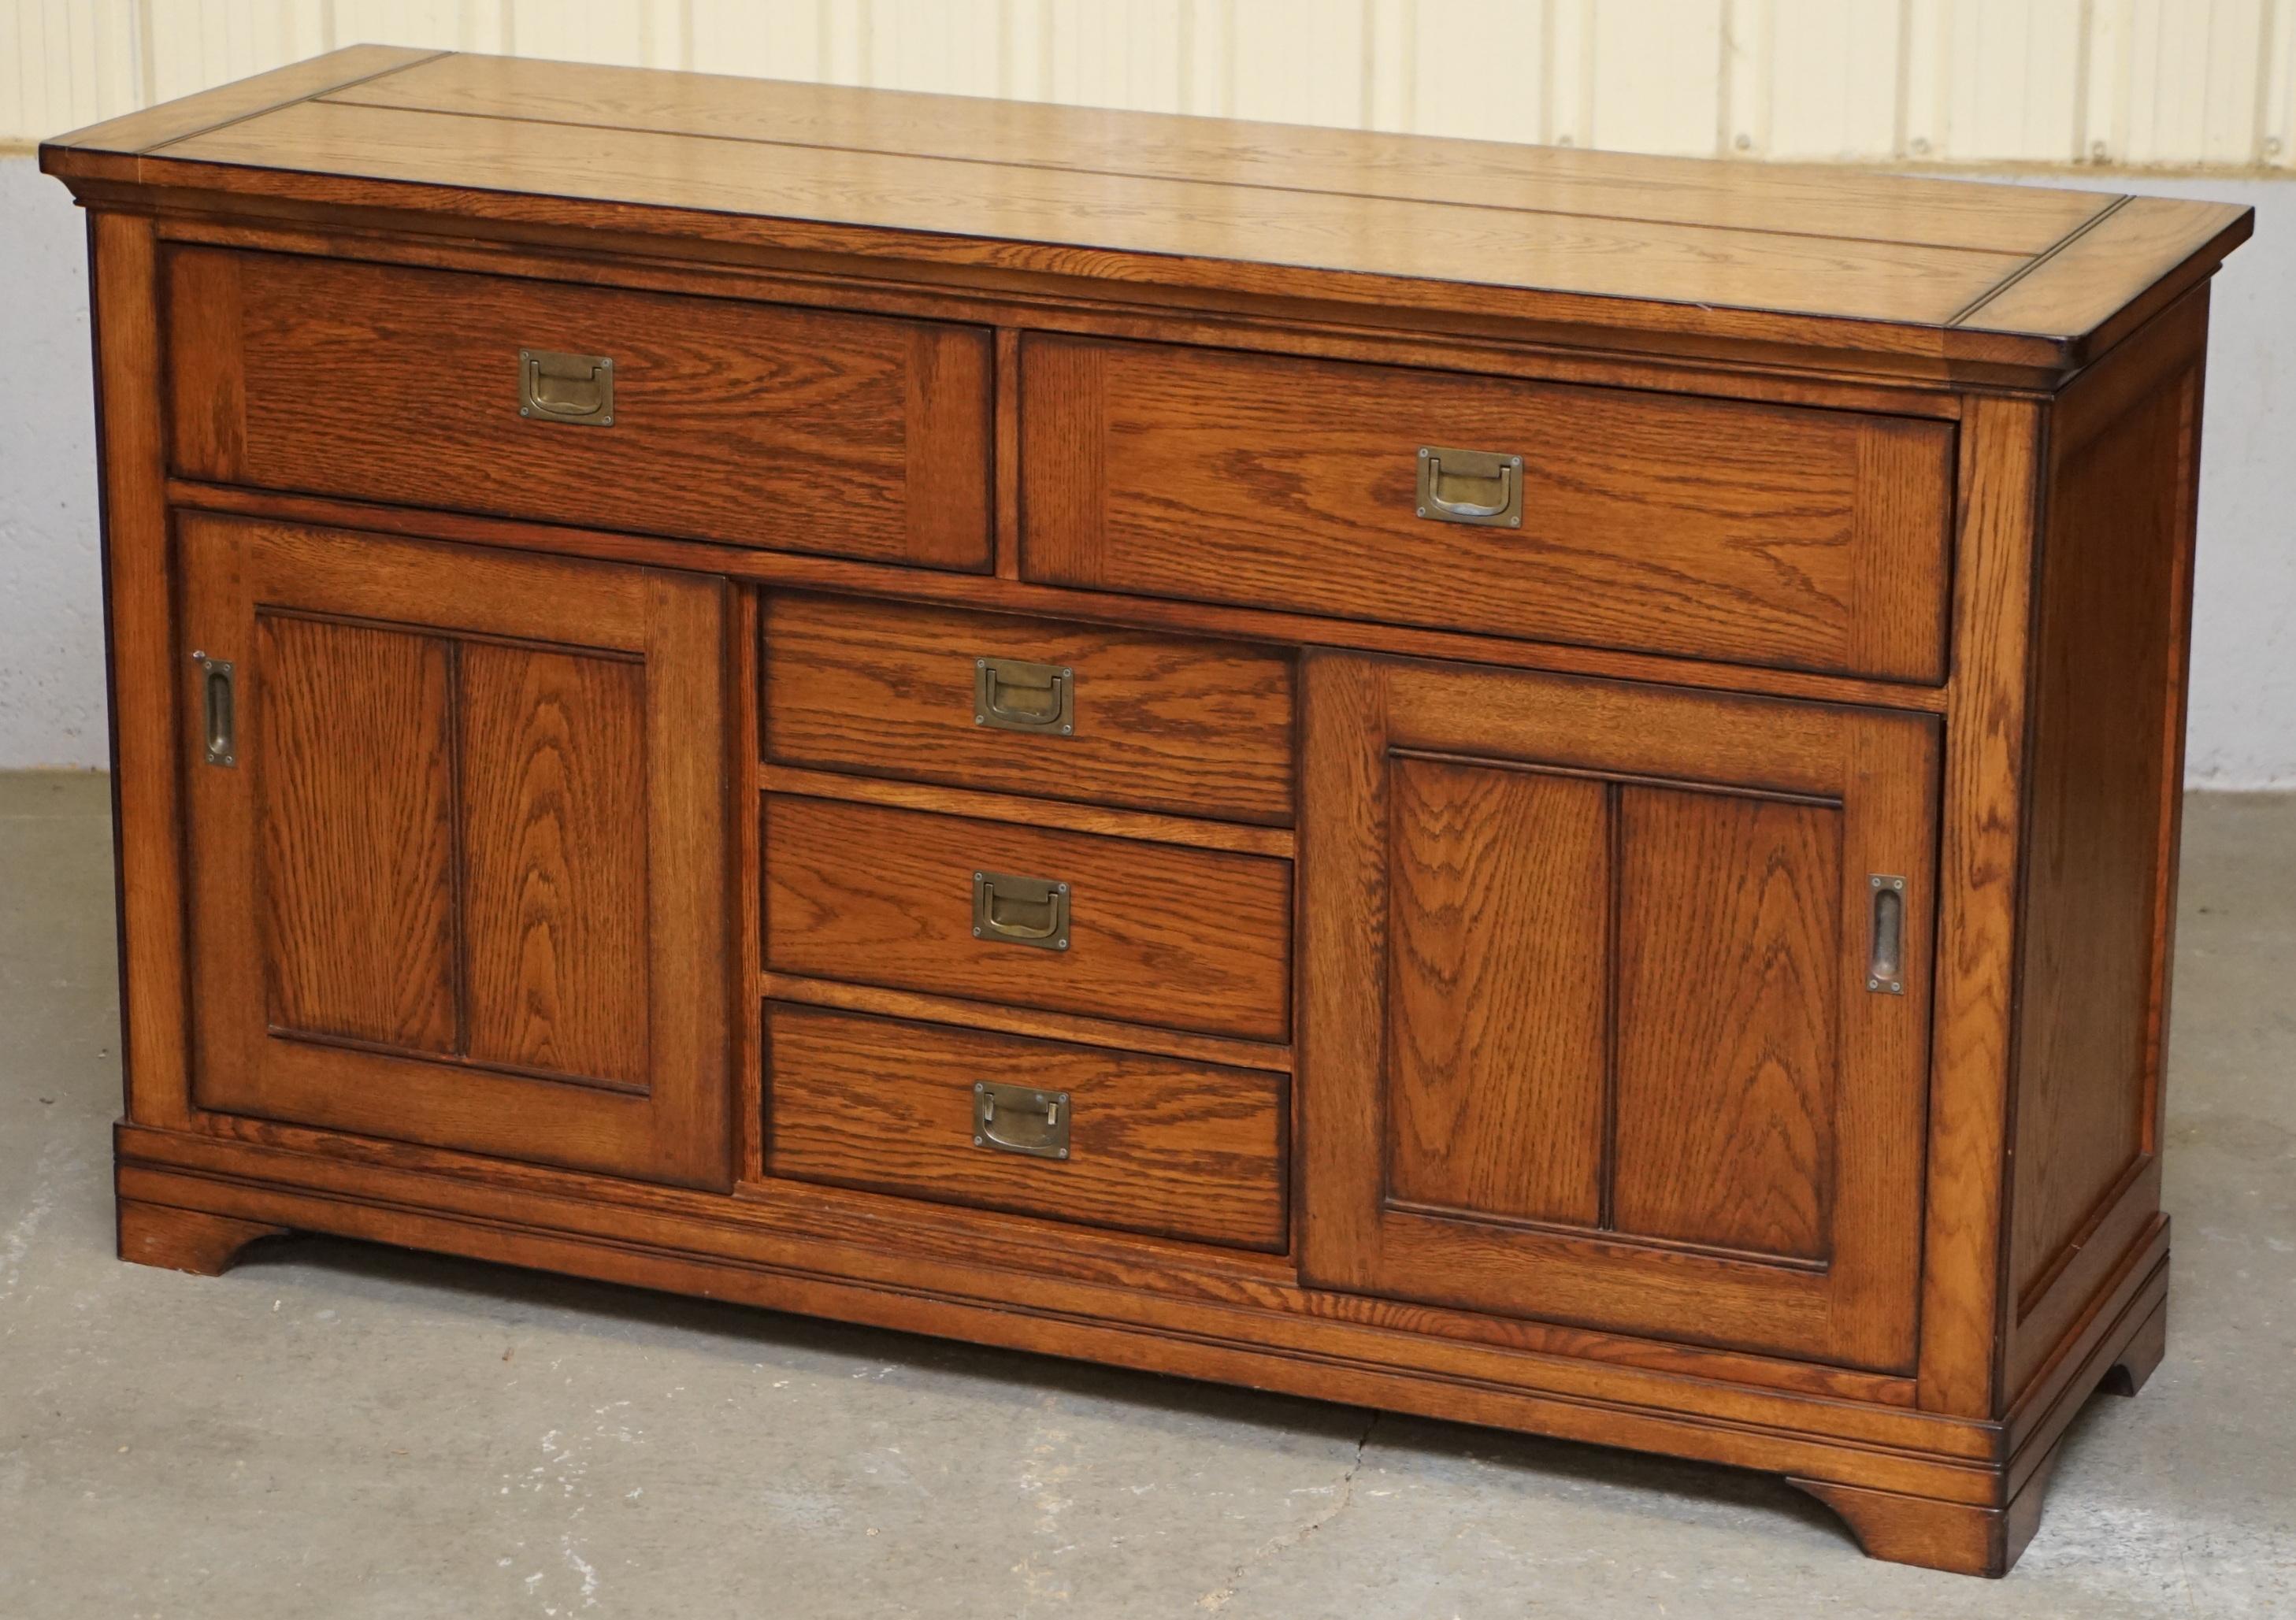 English Stunning Solid Oak Vintage Campaign Style Sideboard with Drawers and Cupboards